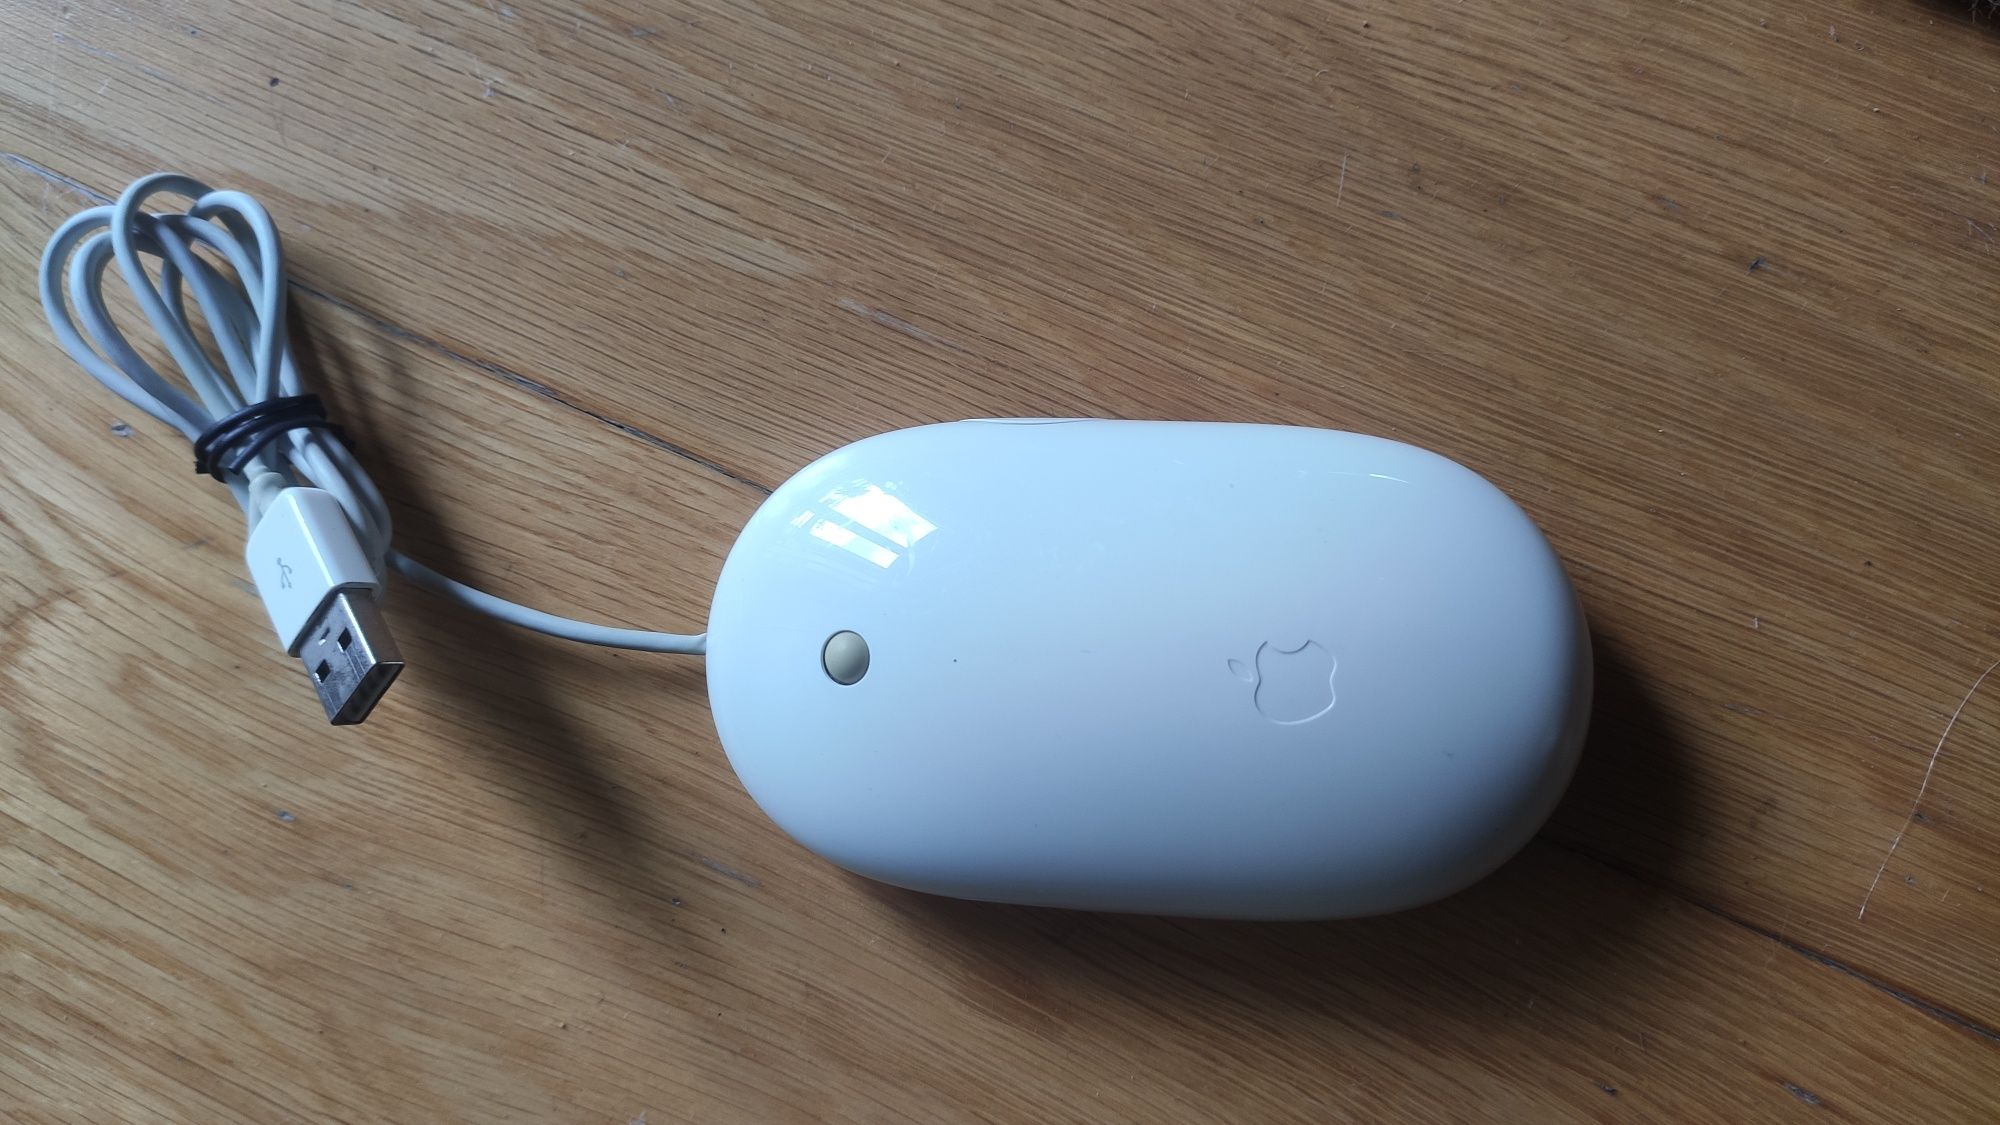 Apple mighty mouse